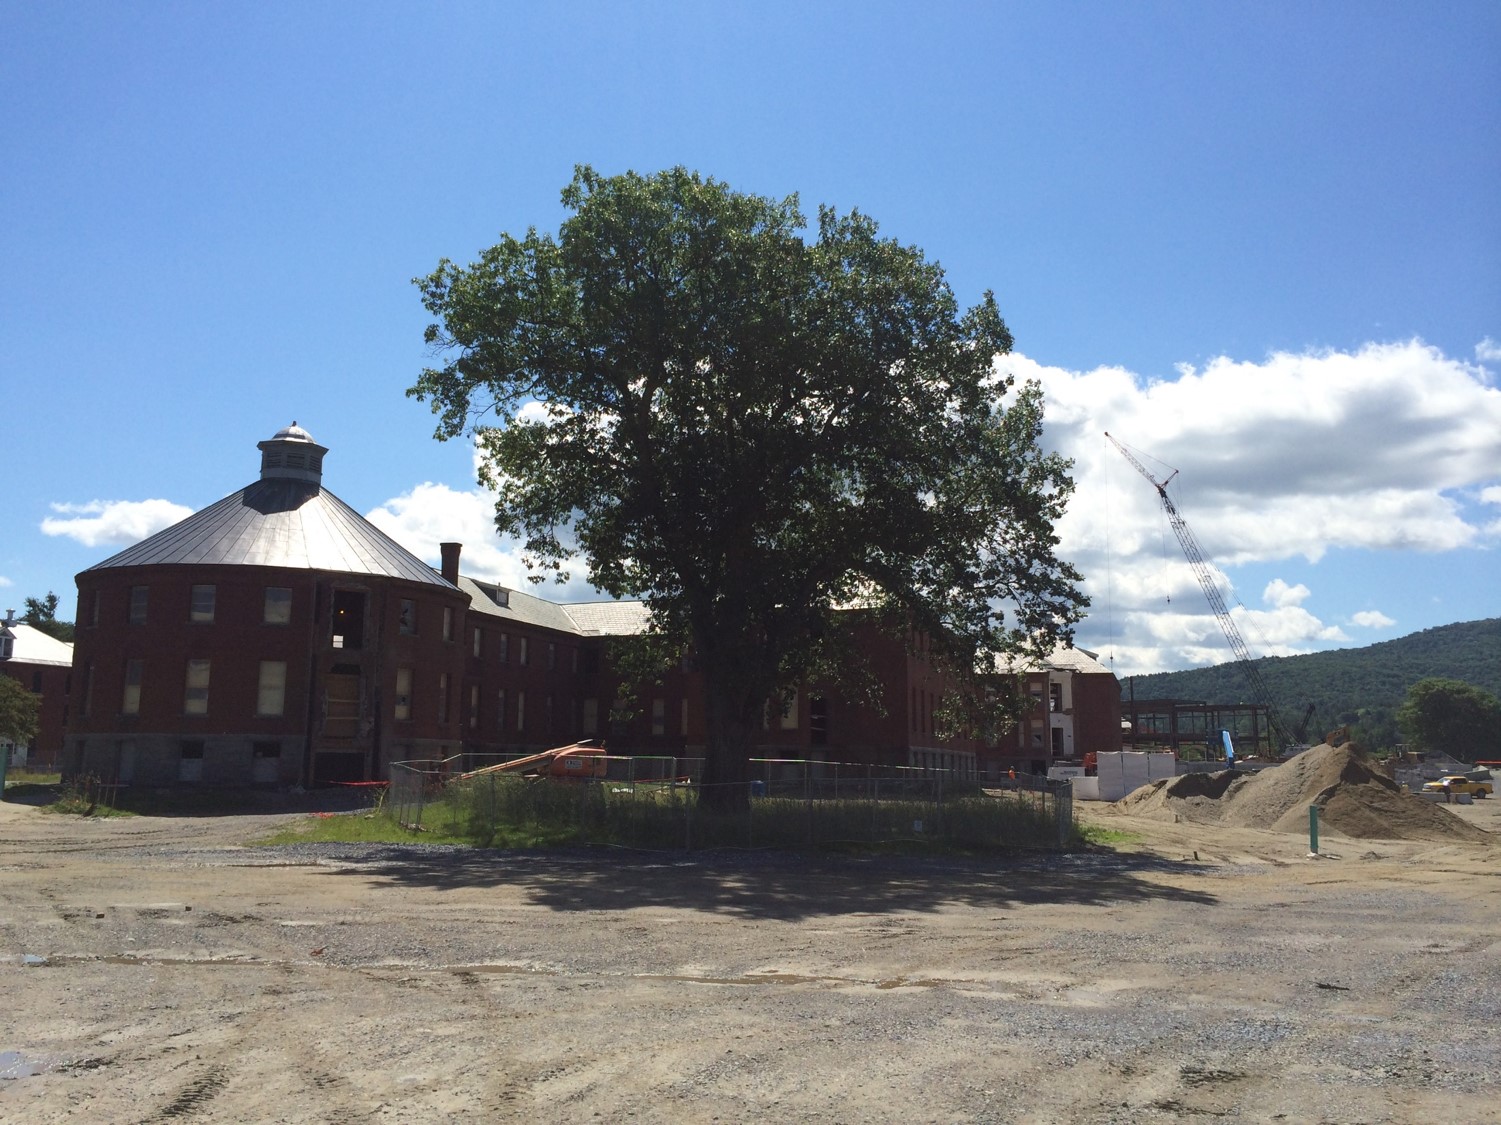 Large tree being protected during reconstruction of Vermont state government offices, Waterbury, Vermont